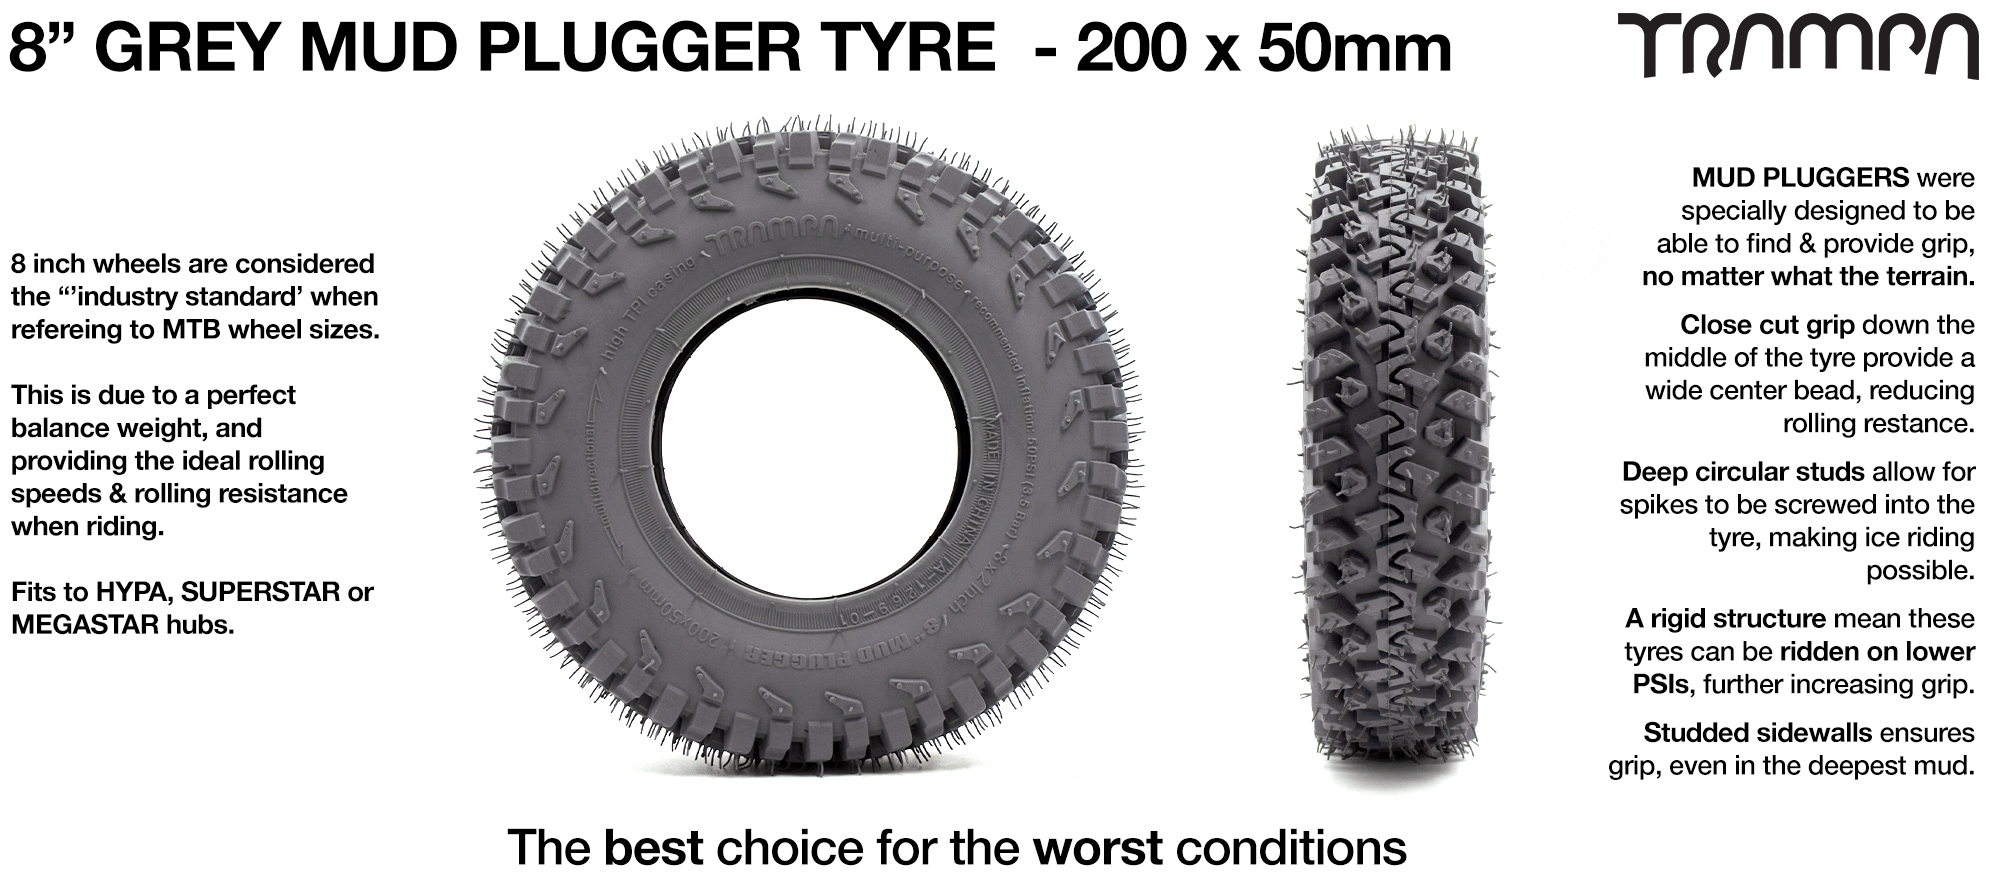 TRAMPA MUD-PLUGGER 8 Inch Tyre measure 3.75x 2x 8 Inch or 200x50mm with 3.75 inch Rim fits all 3.75 inch Hubs - GREY